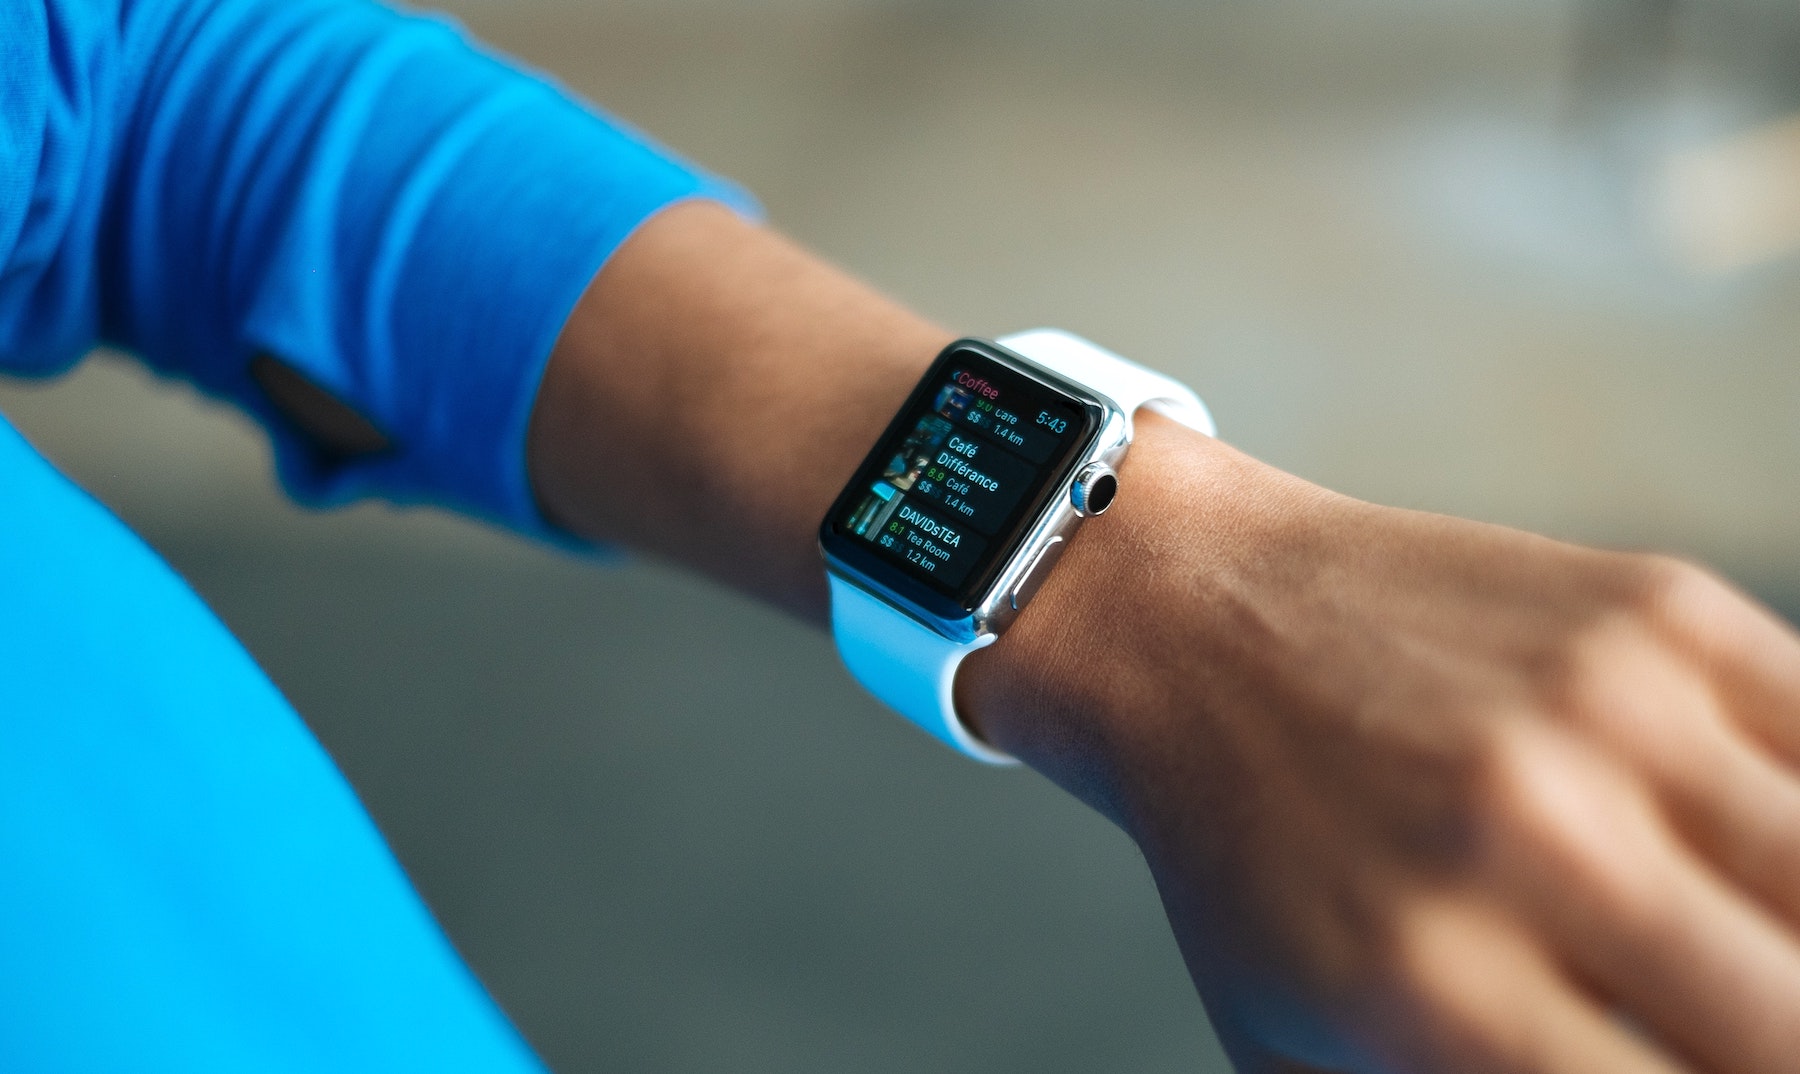 Sensors and antennas are critical components of wearable technologies, like the smart watch pictured here.